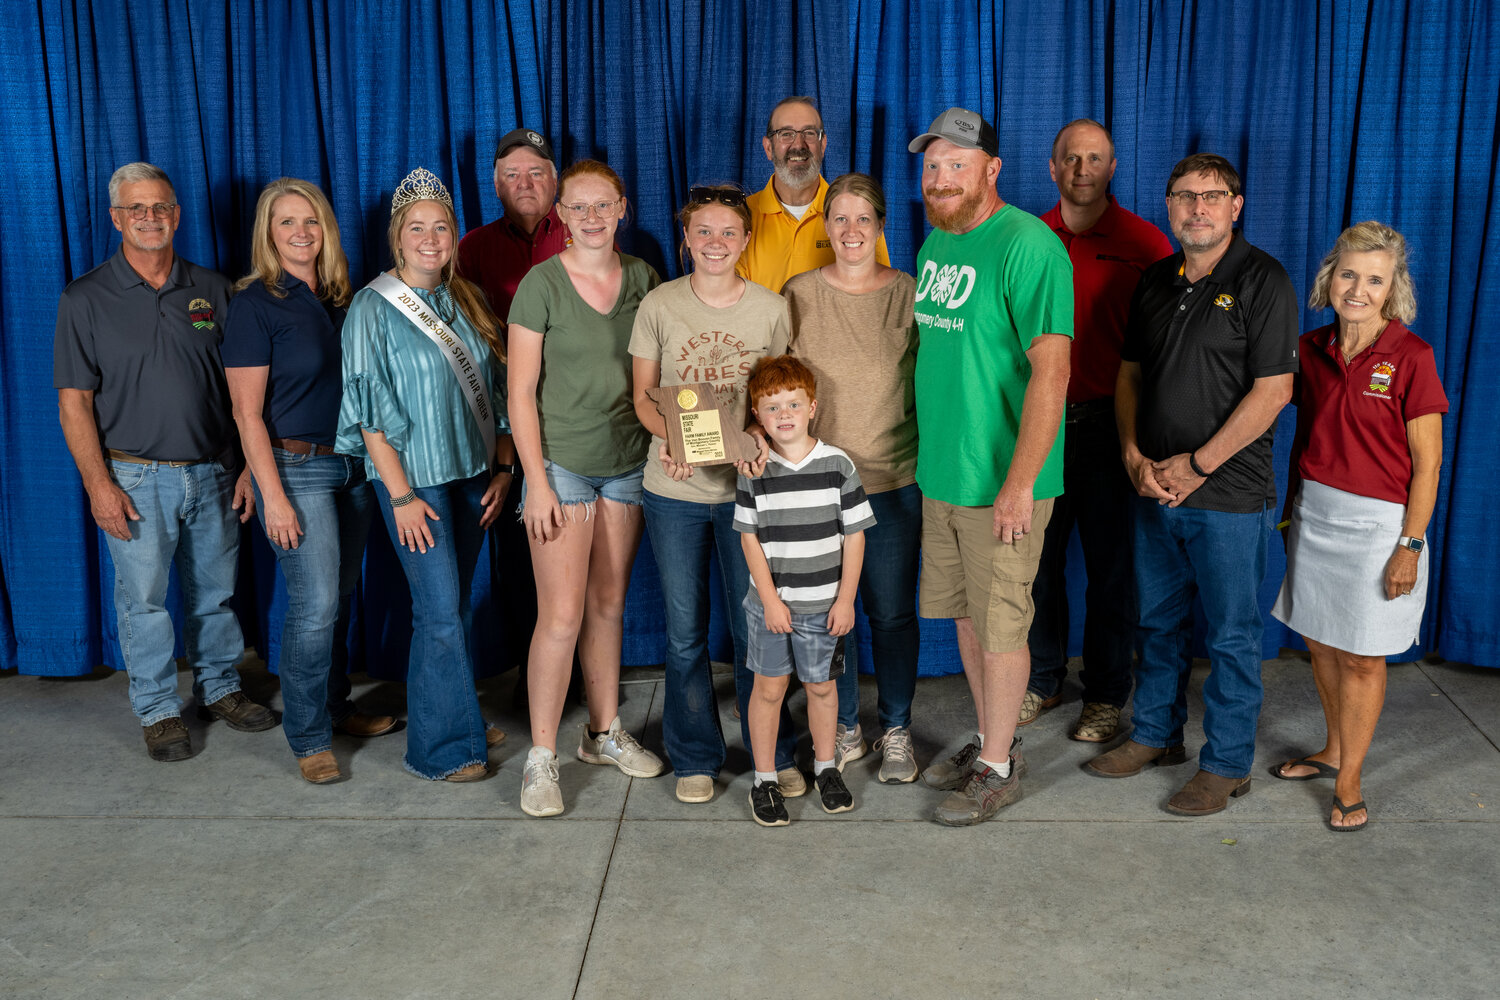 The VanBooven family was chosen as the Missouri Farm Family for Montgomery County. Pictured are, front row from left, Andrea VanBooven, Victoria VanBooven, Gus VanBooven, Melissa VanBooven and Jim VanBooven. Back row are Mark Wolfe, Missouri State Fair Director; Christine Chinn, Director, Missouri Department of Agriculture; Kelsey Miller, Missouri State Fair Queen; Ted E. Sheppard, Missouri State Fair Commissioner; Chad Higgins, Interim Vice Chancellor for MU Extension and Engagement and Interim Chief Engagement Officer, UM System; Garrett Hawkins, President, Missouri Farm Bureau; Harold “Byron” Roach, Missouri State Fair Commissioner; Rob Kallenbach, MU Associate Dean of Extension and Senior Program Director of Agriculture and Environment; and Nikki Cunningham. Missouri State Fair Commissioner.